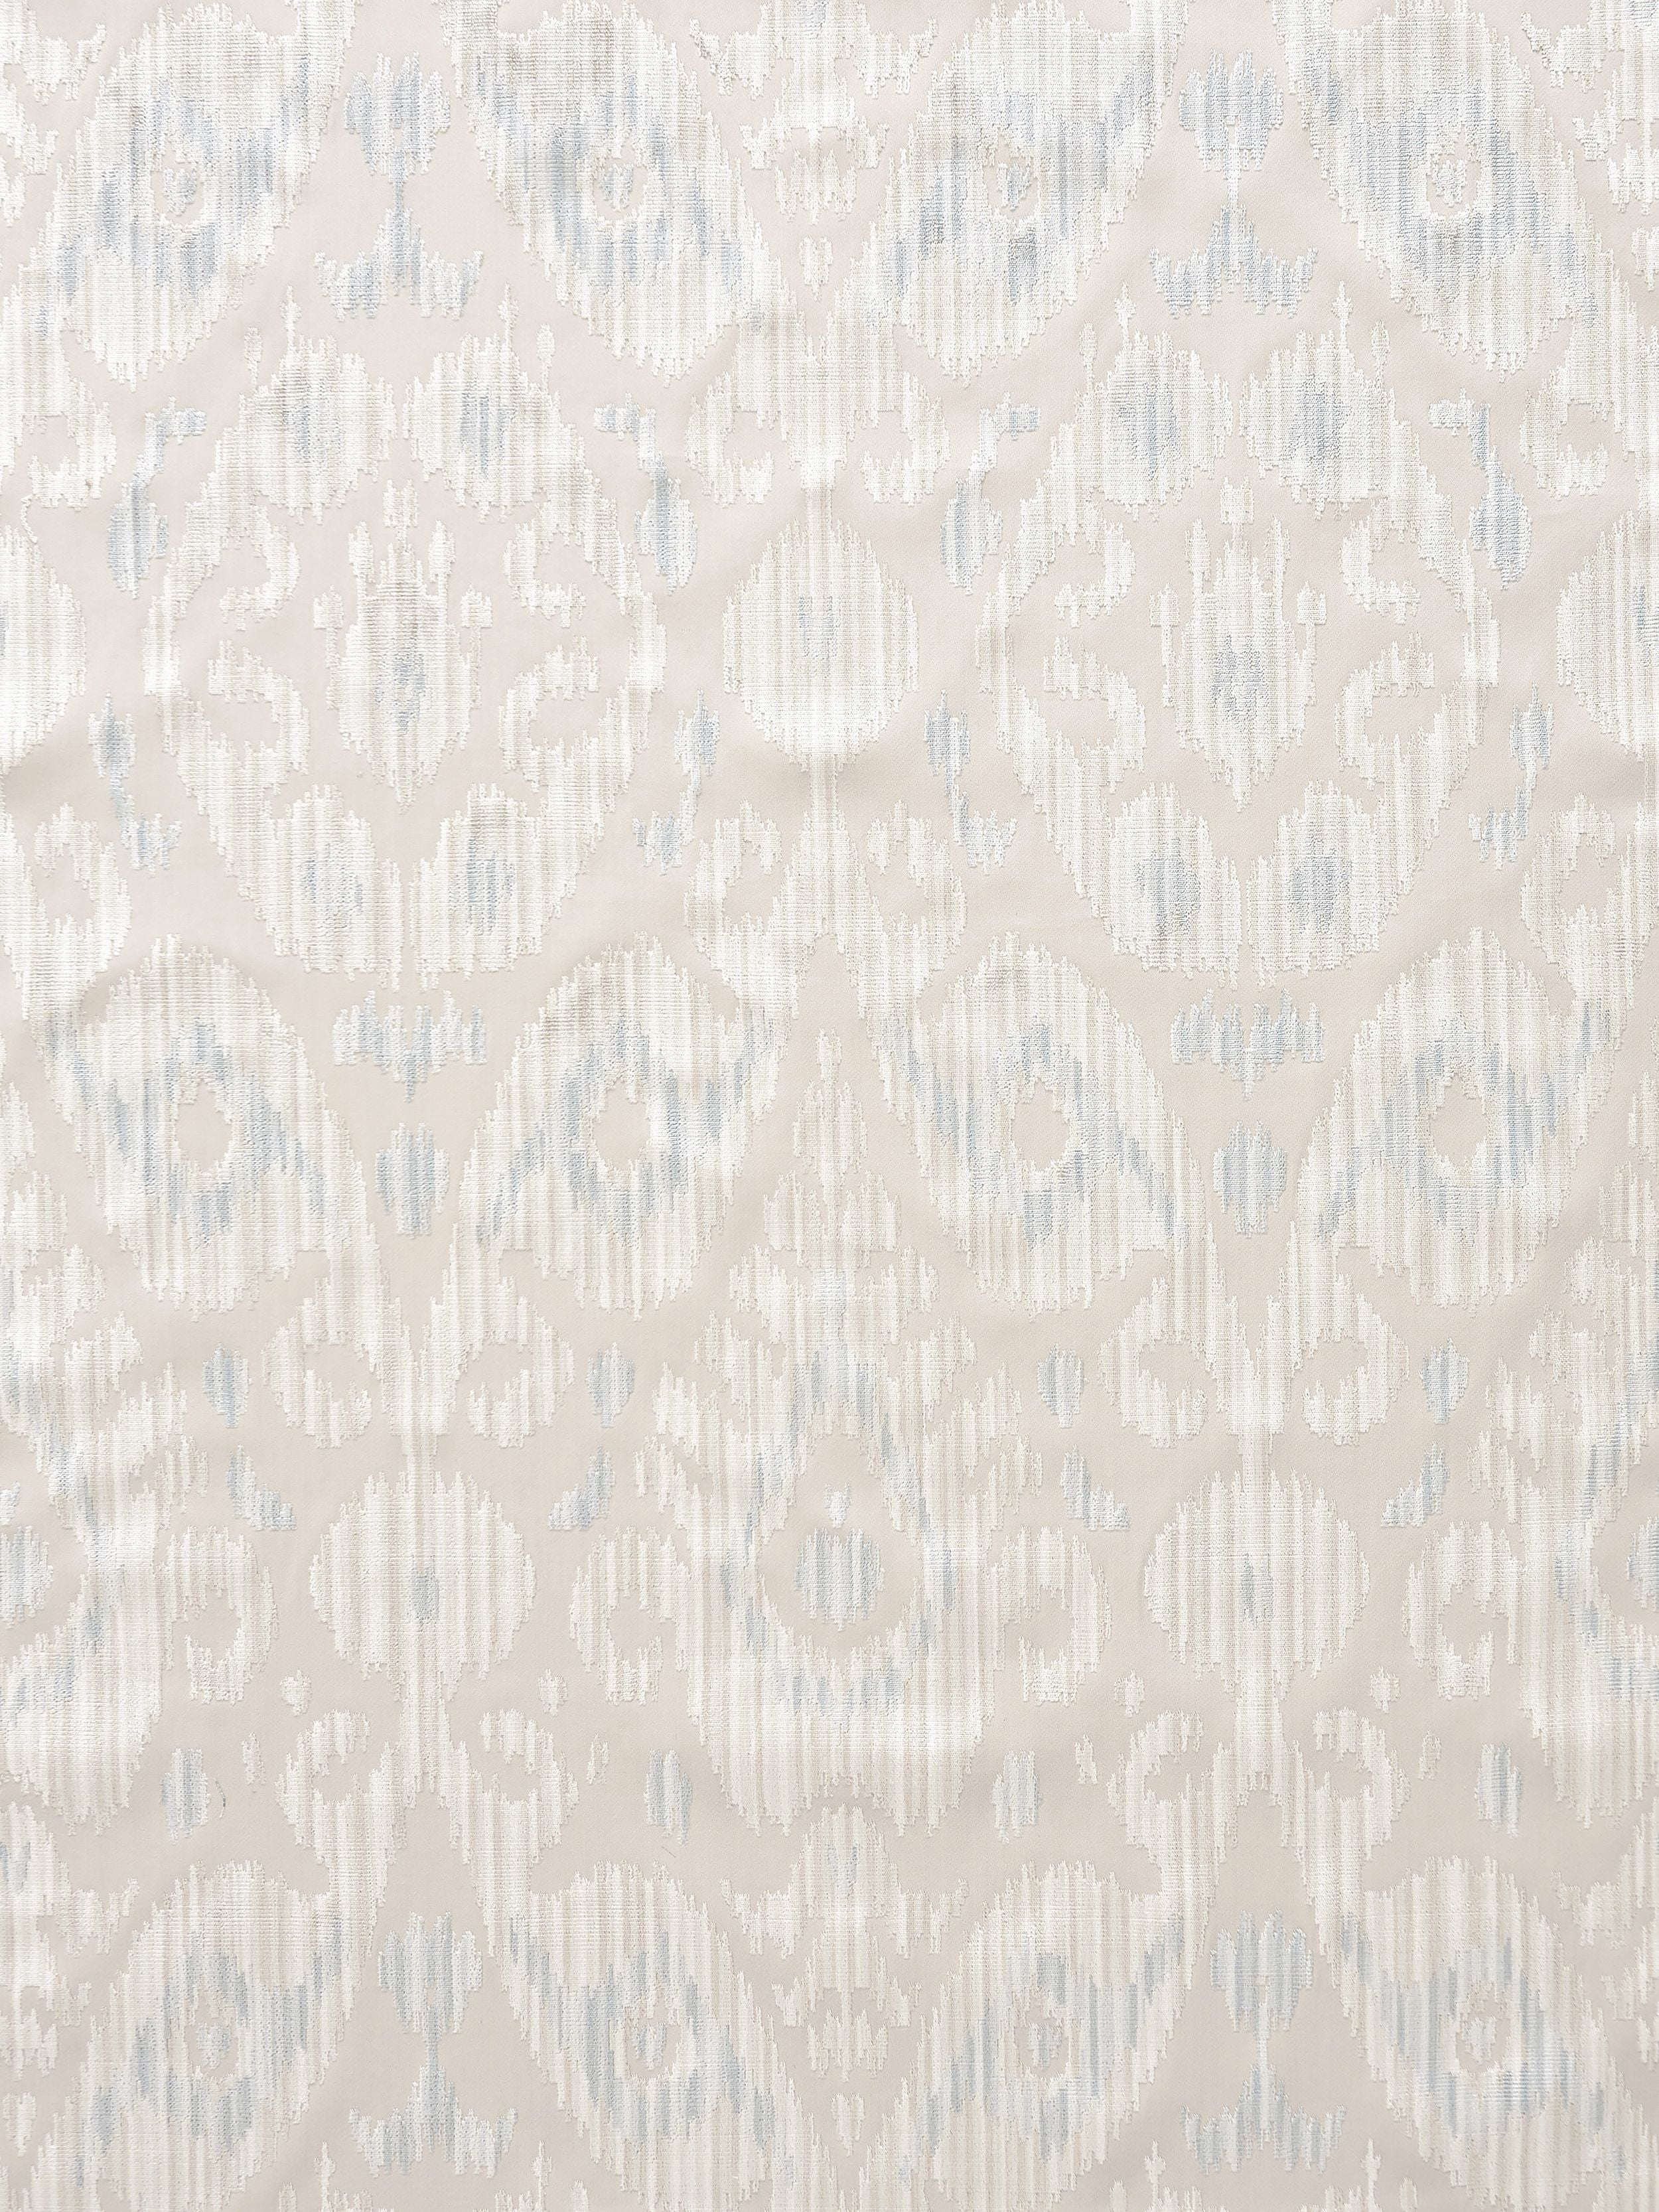 Tashkent Velvet fabric in cloud color - pattern number SC 000127015 - by Scalamandre in the Scalamandre Fabrics Book 1 collection